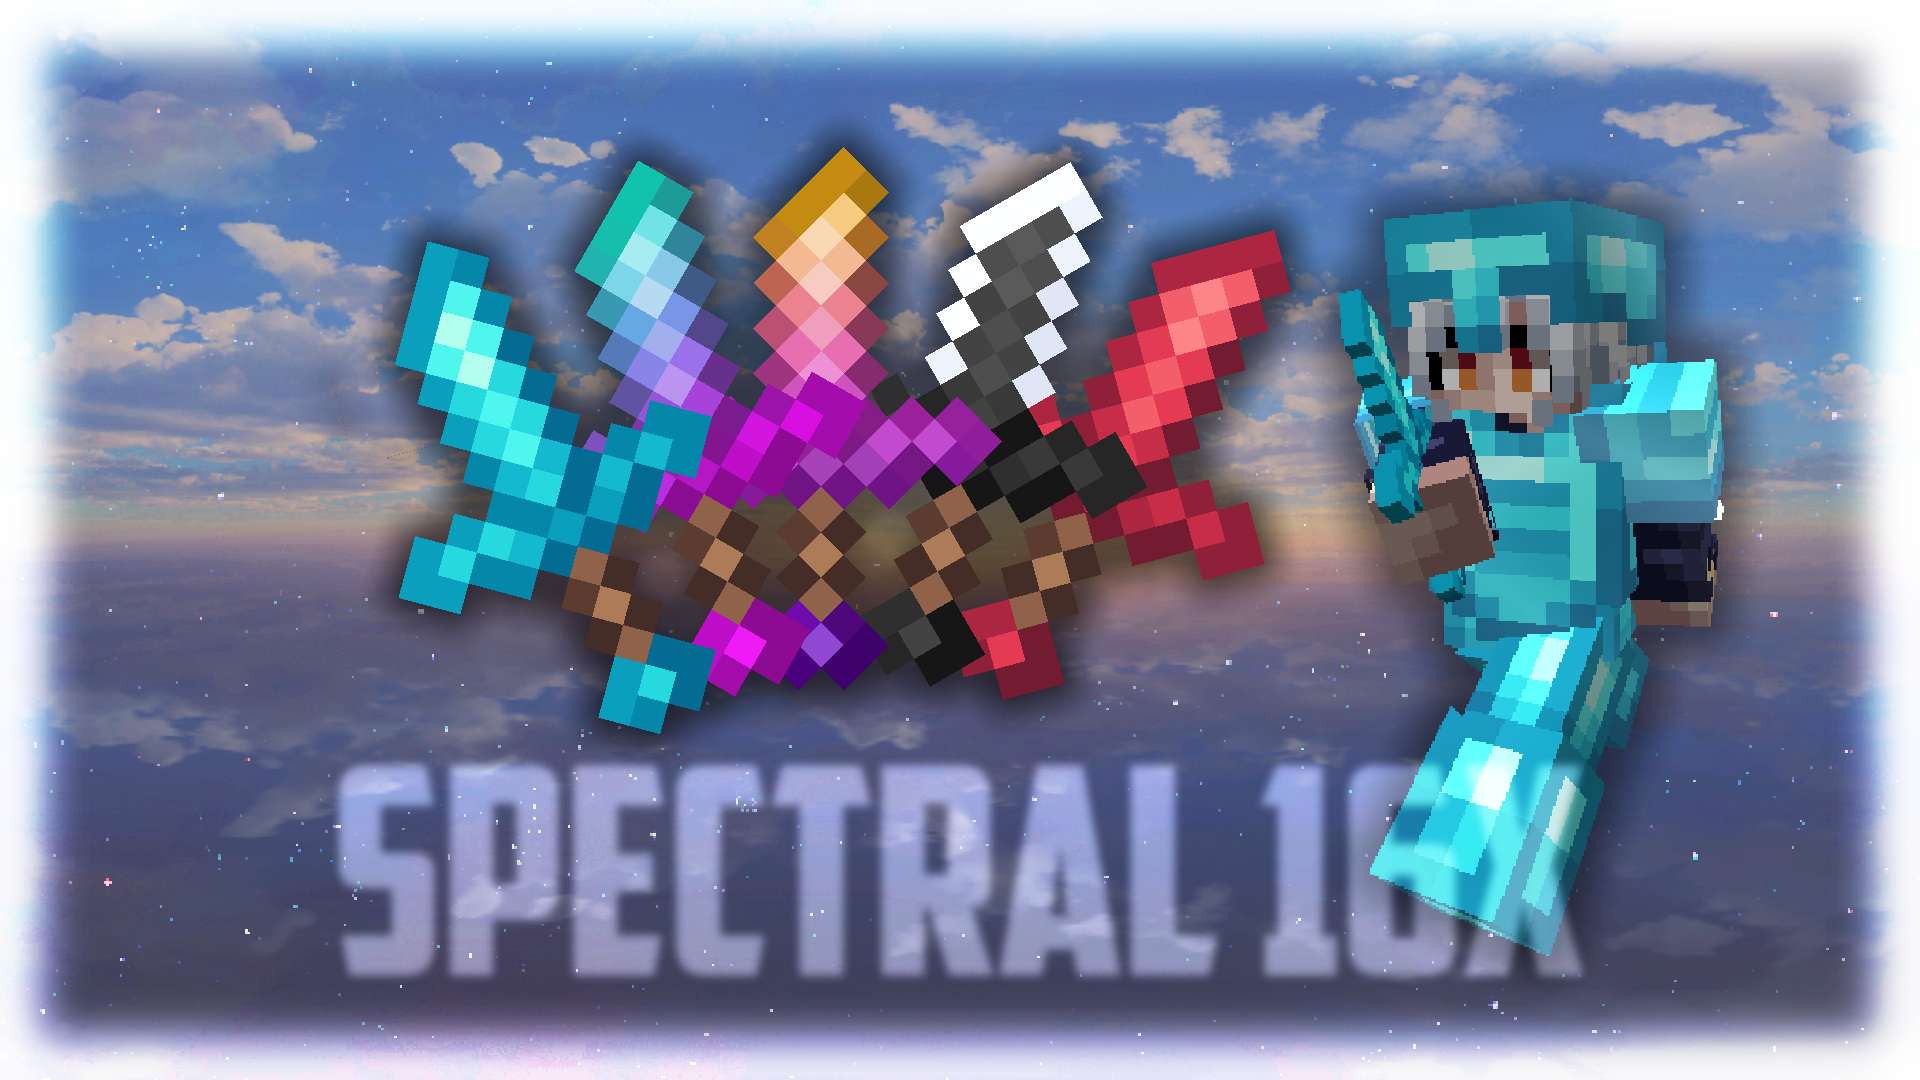 Spectral - Jade 16x by Zlax on PvPRP